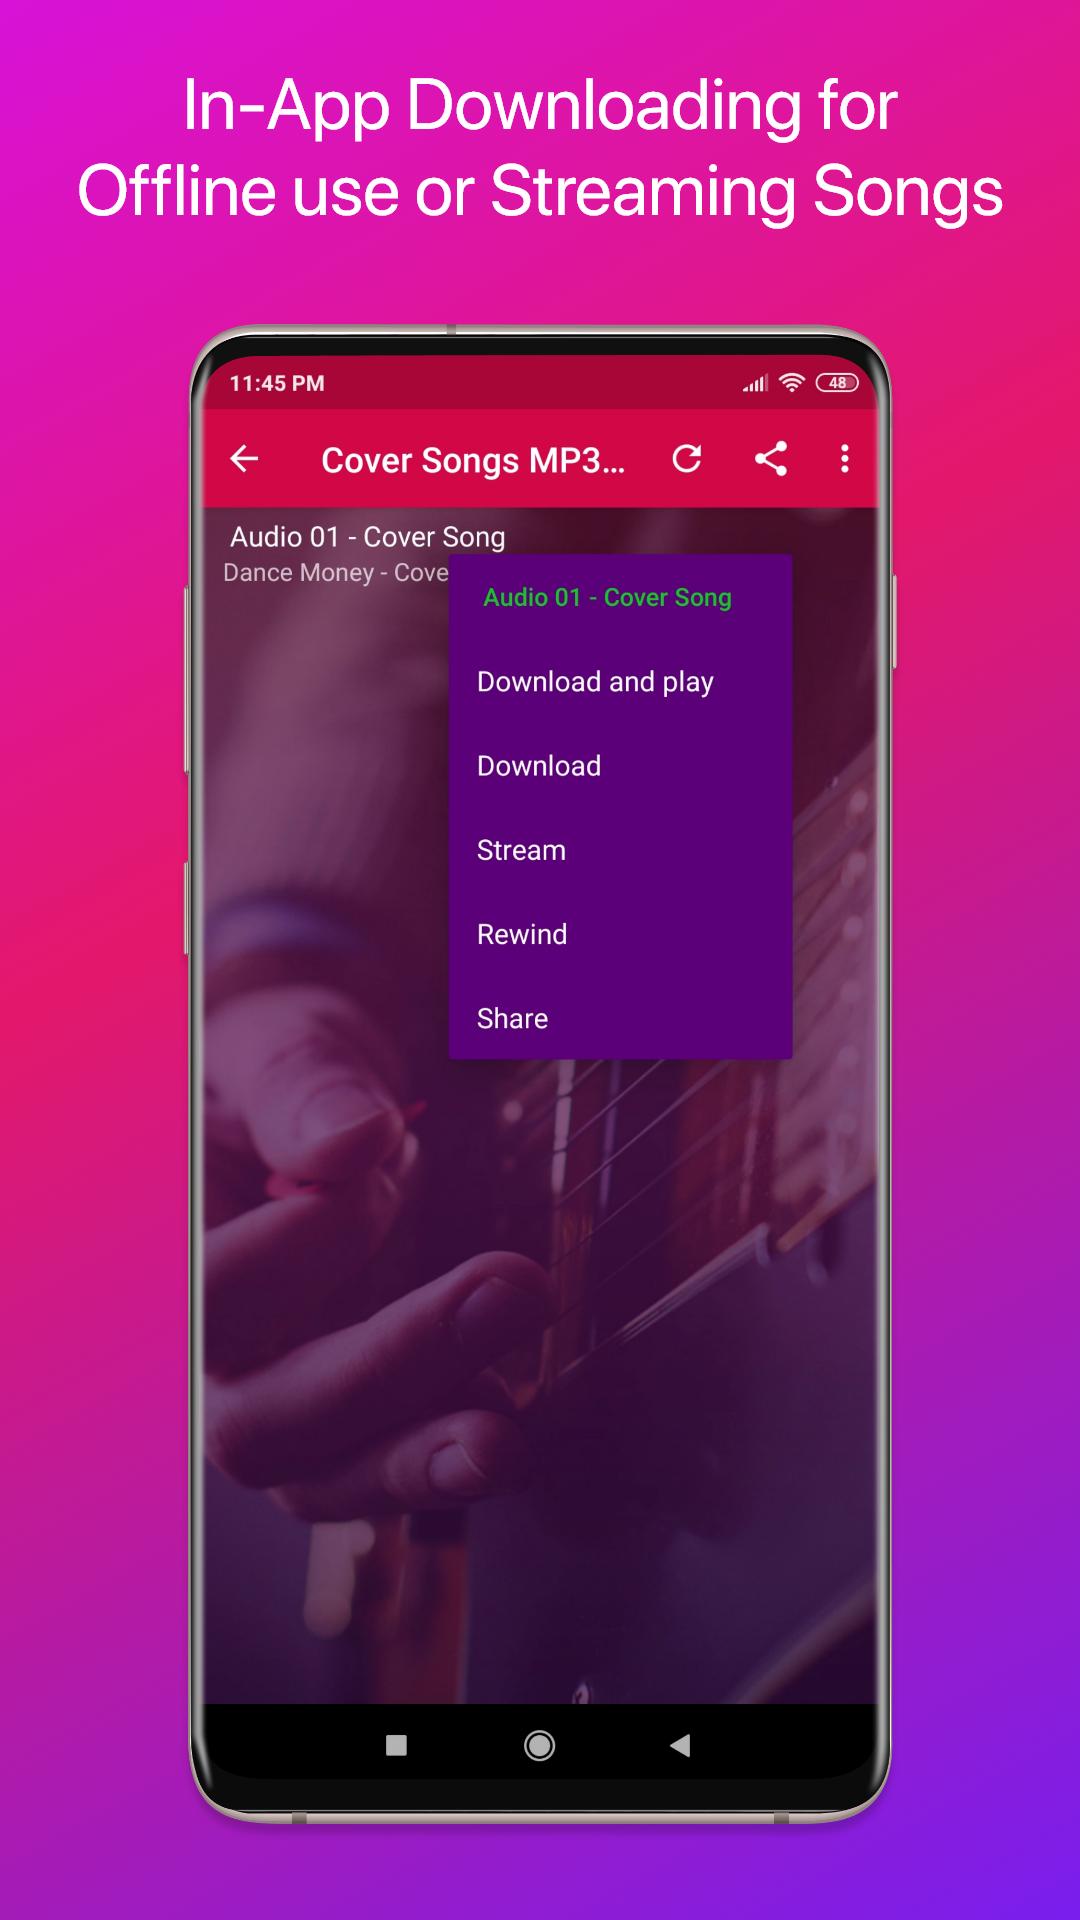 Sinhala Songs MP3 2020 - ලස්සන සින්දු for Android - APK Download